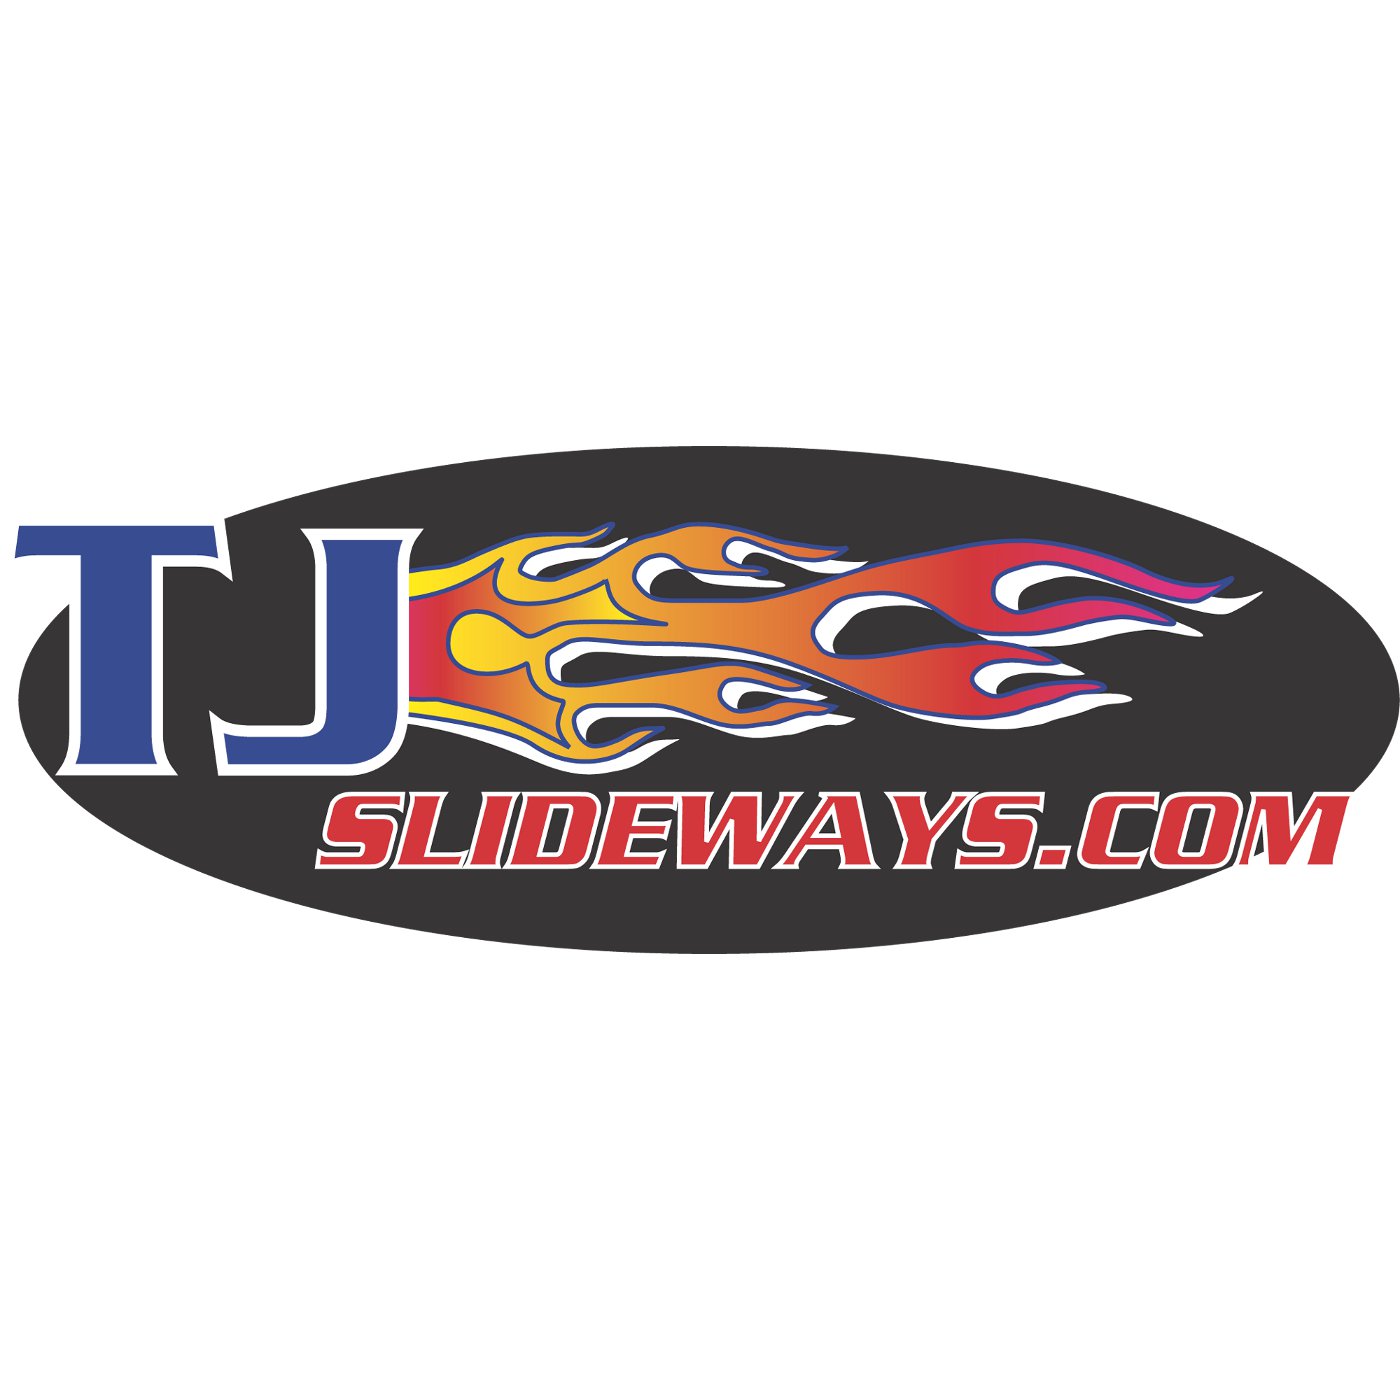 Episode 104: Post Race Podcast from the Napa Rumble at I-96 Speedway